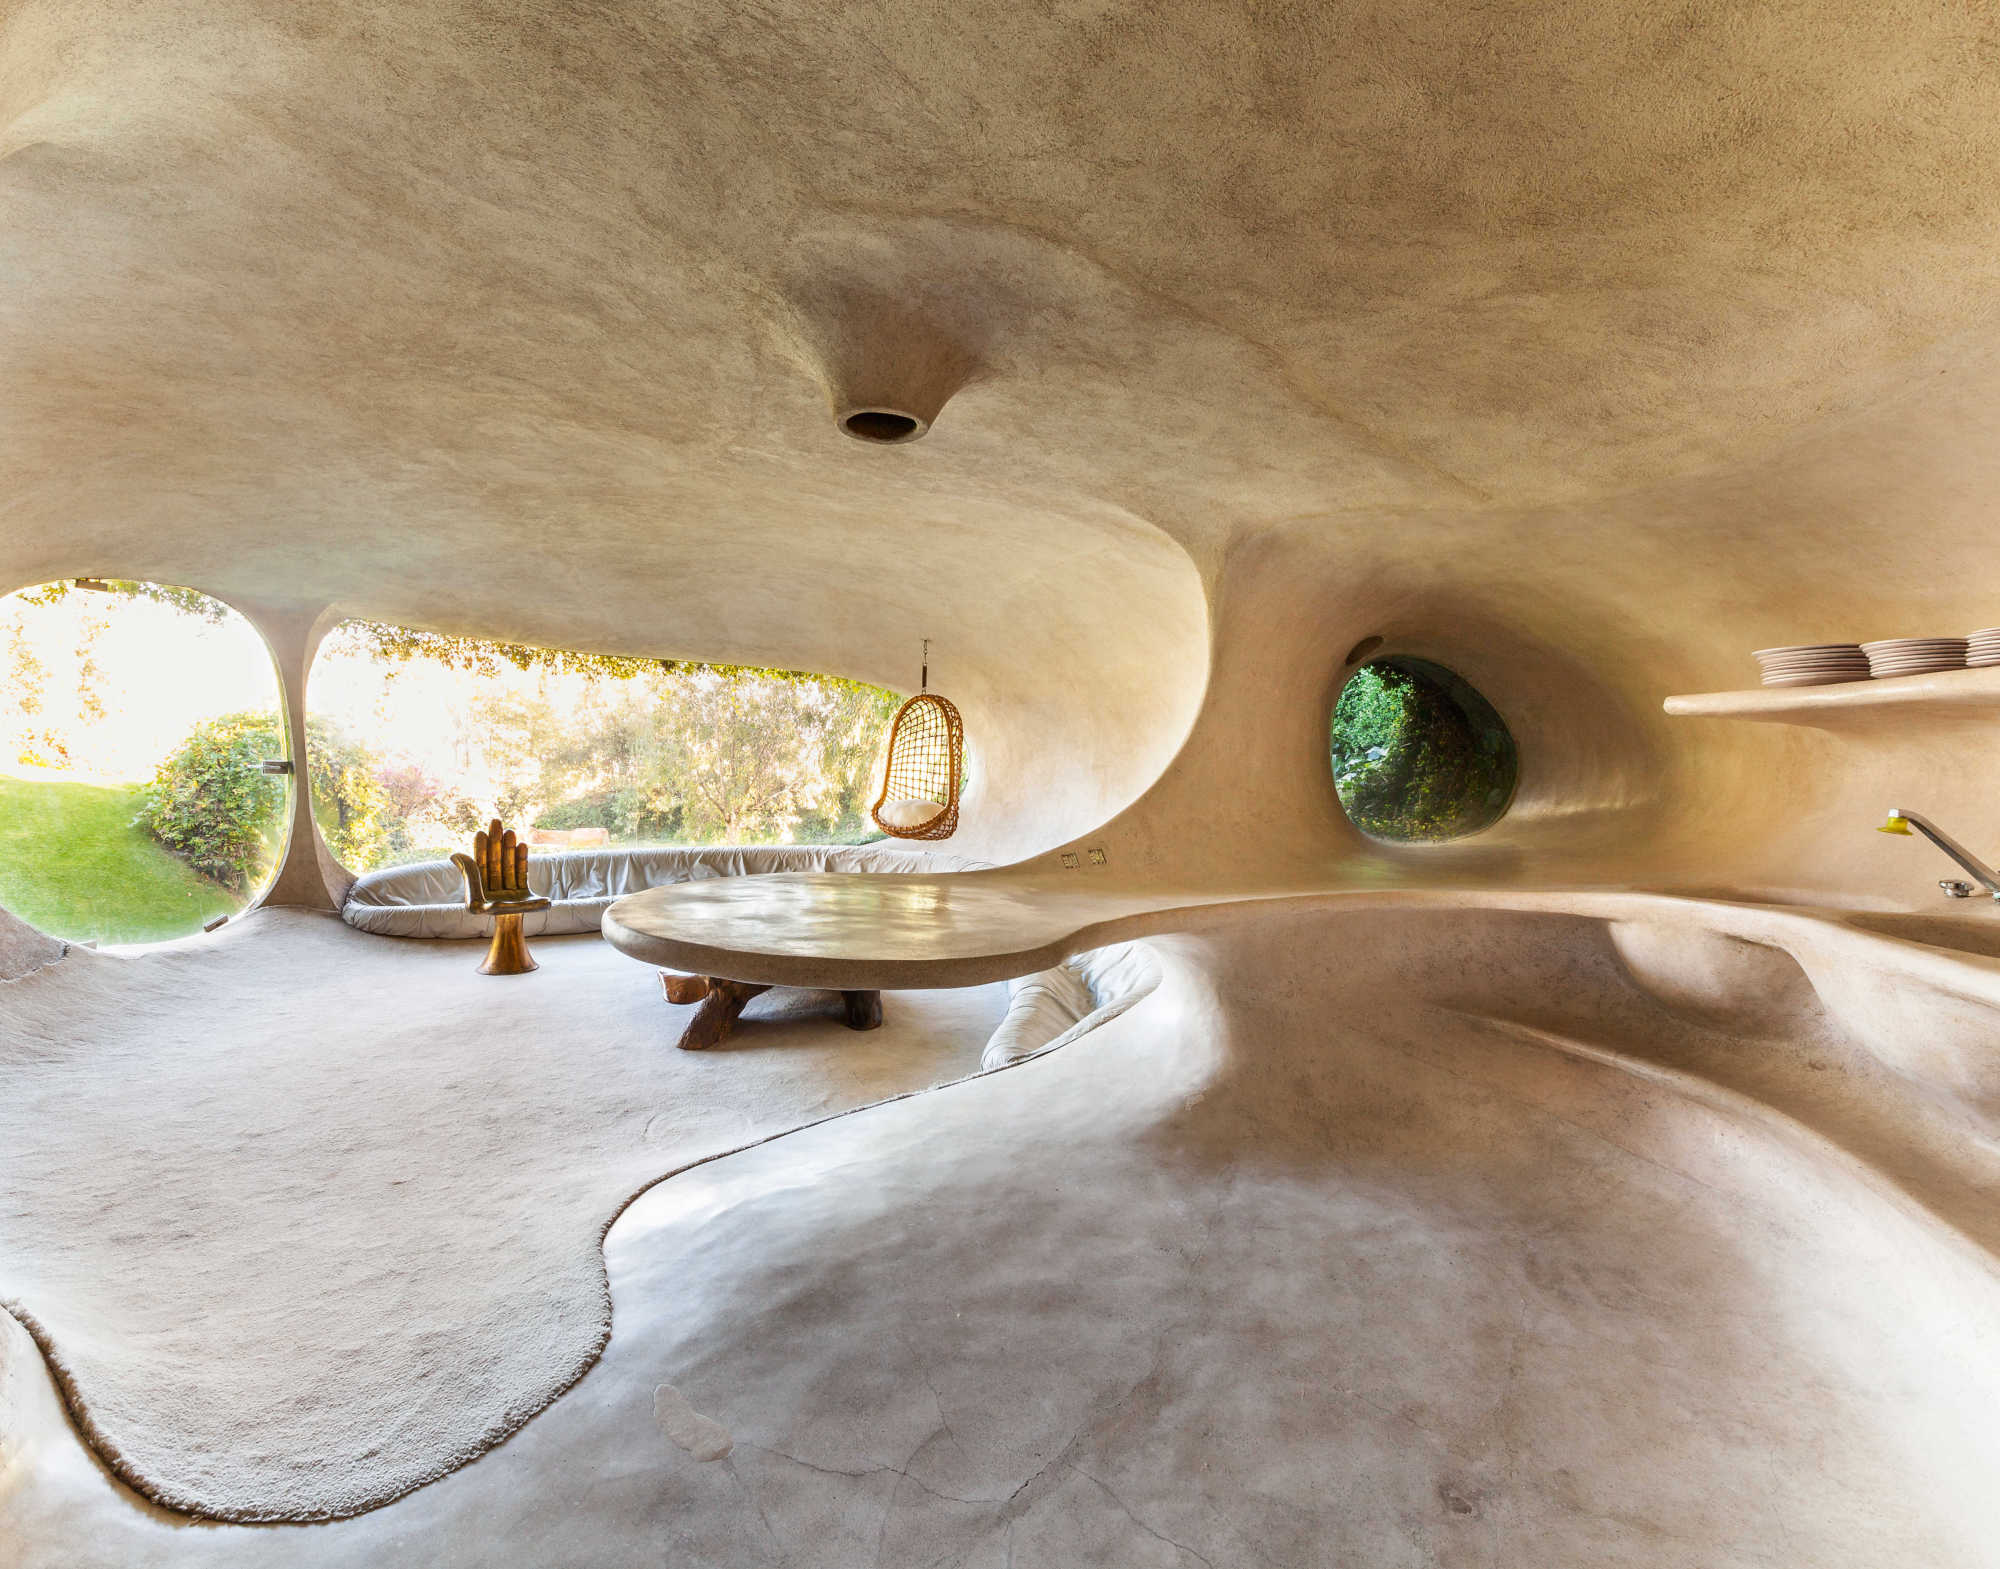 This curvy Mexican house could be mistaken for a work of art